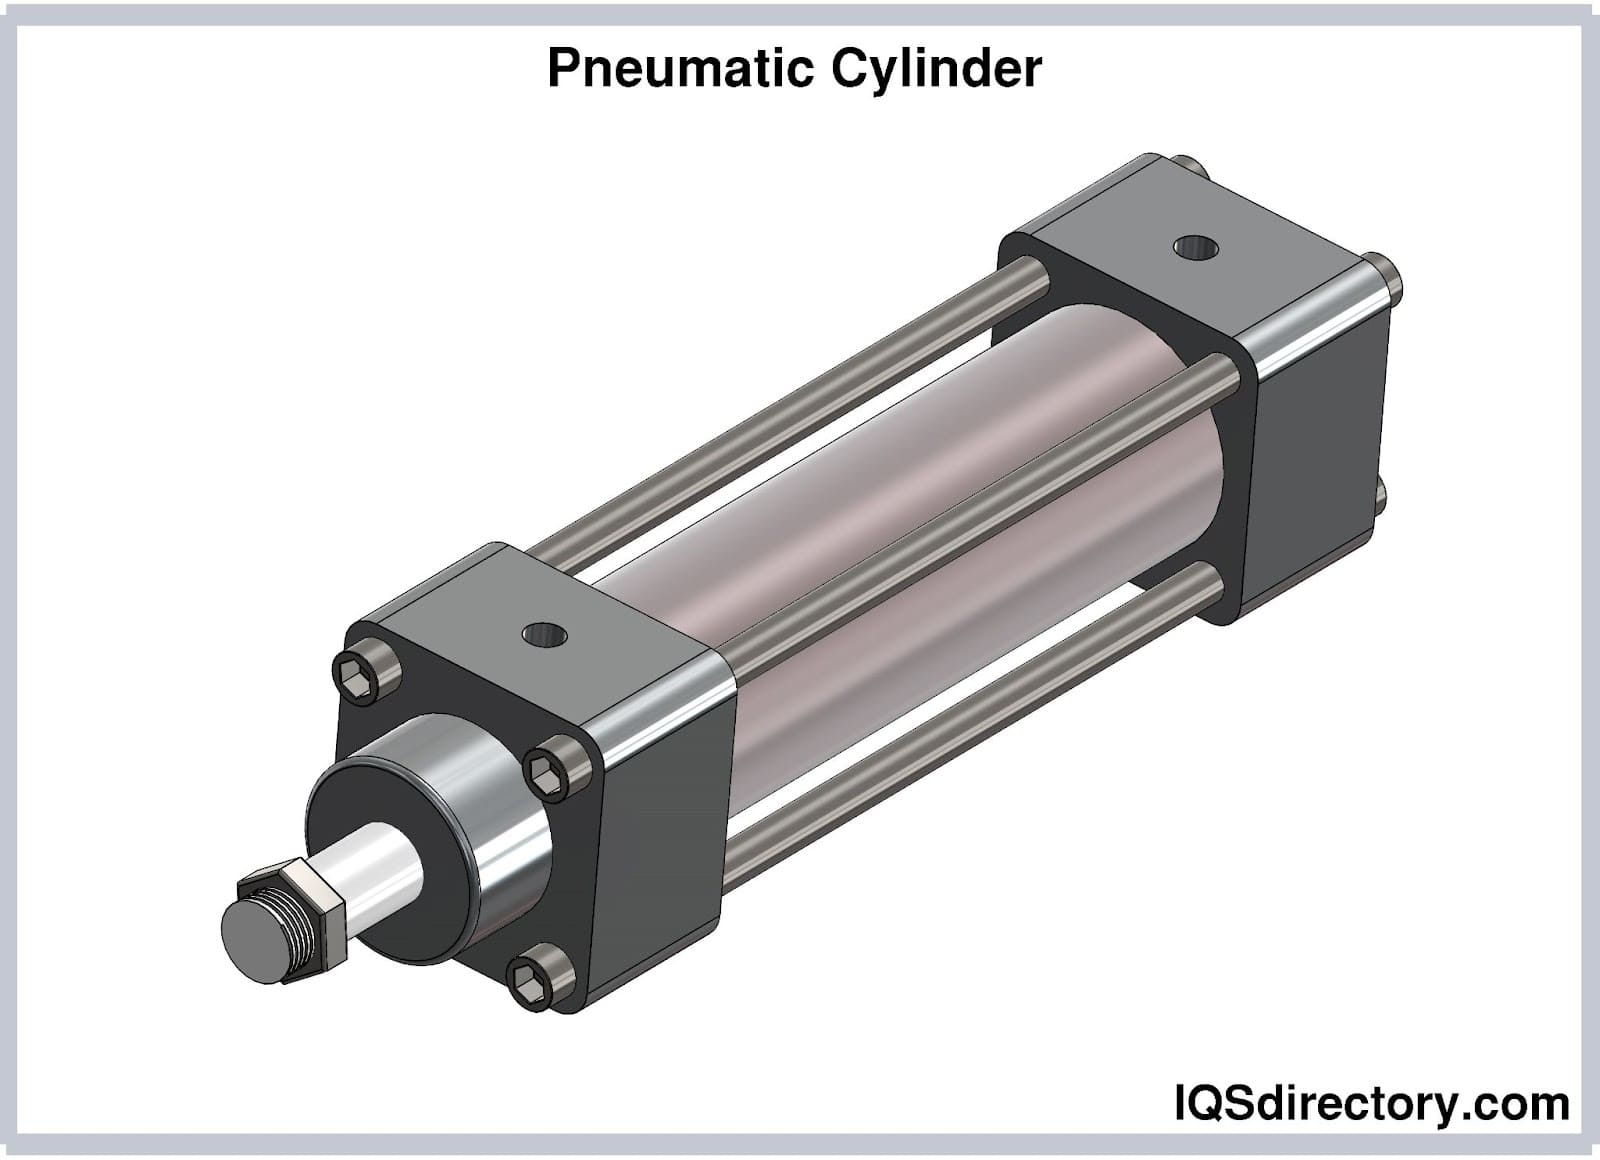 Safely Firm Sturdy Pneumatic Air Cylinder Compact Durable Tough for Guiding Lubrication Pneumatic Standard Cylinder 